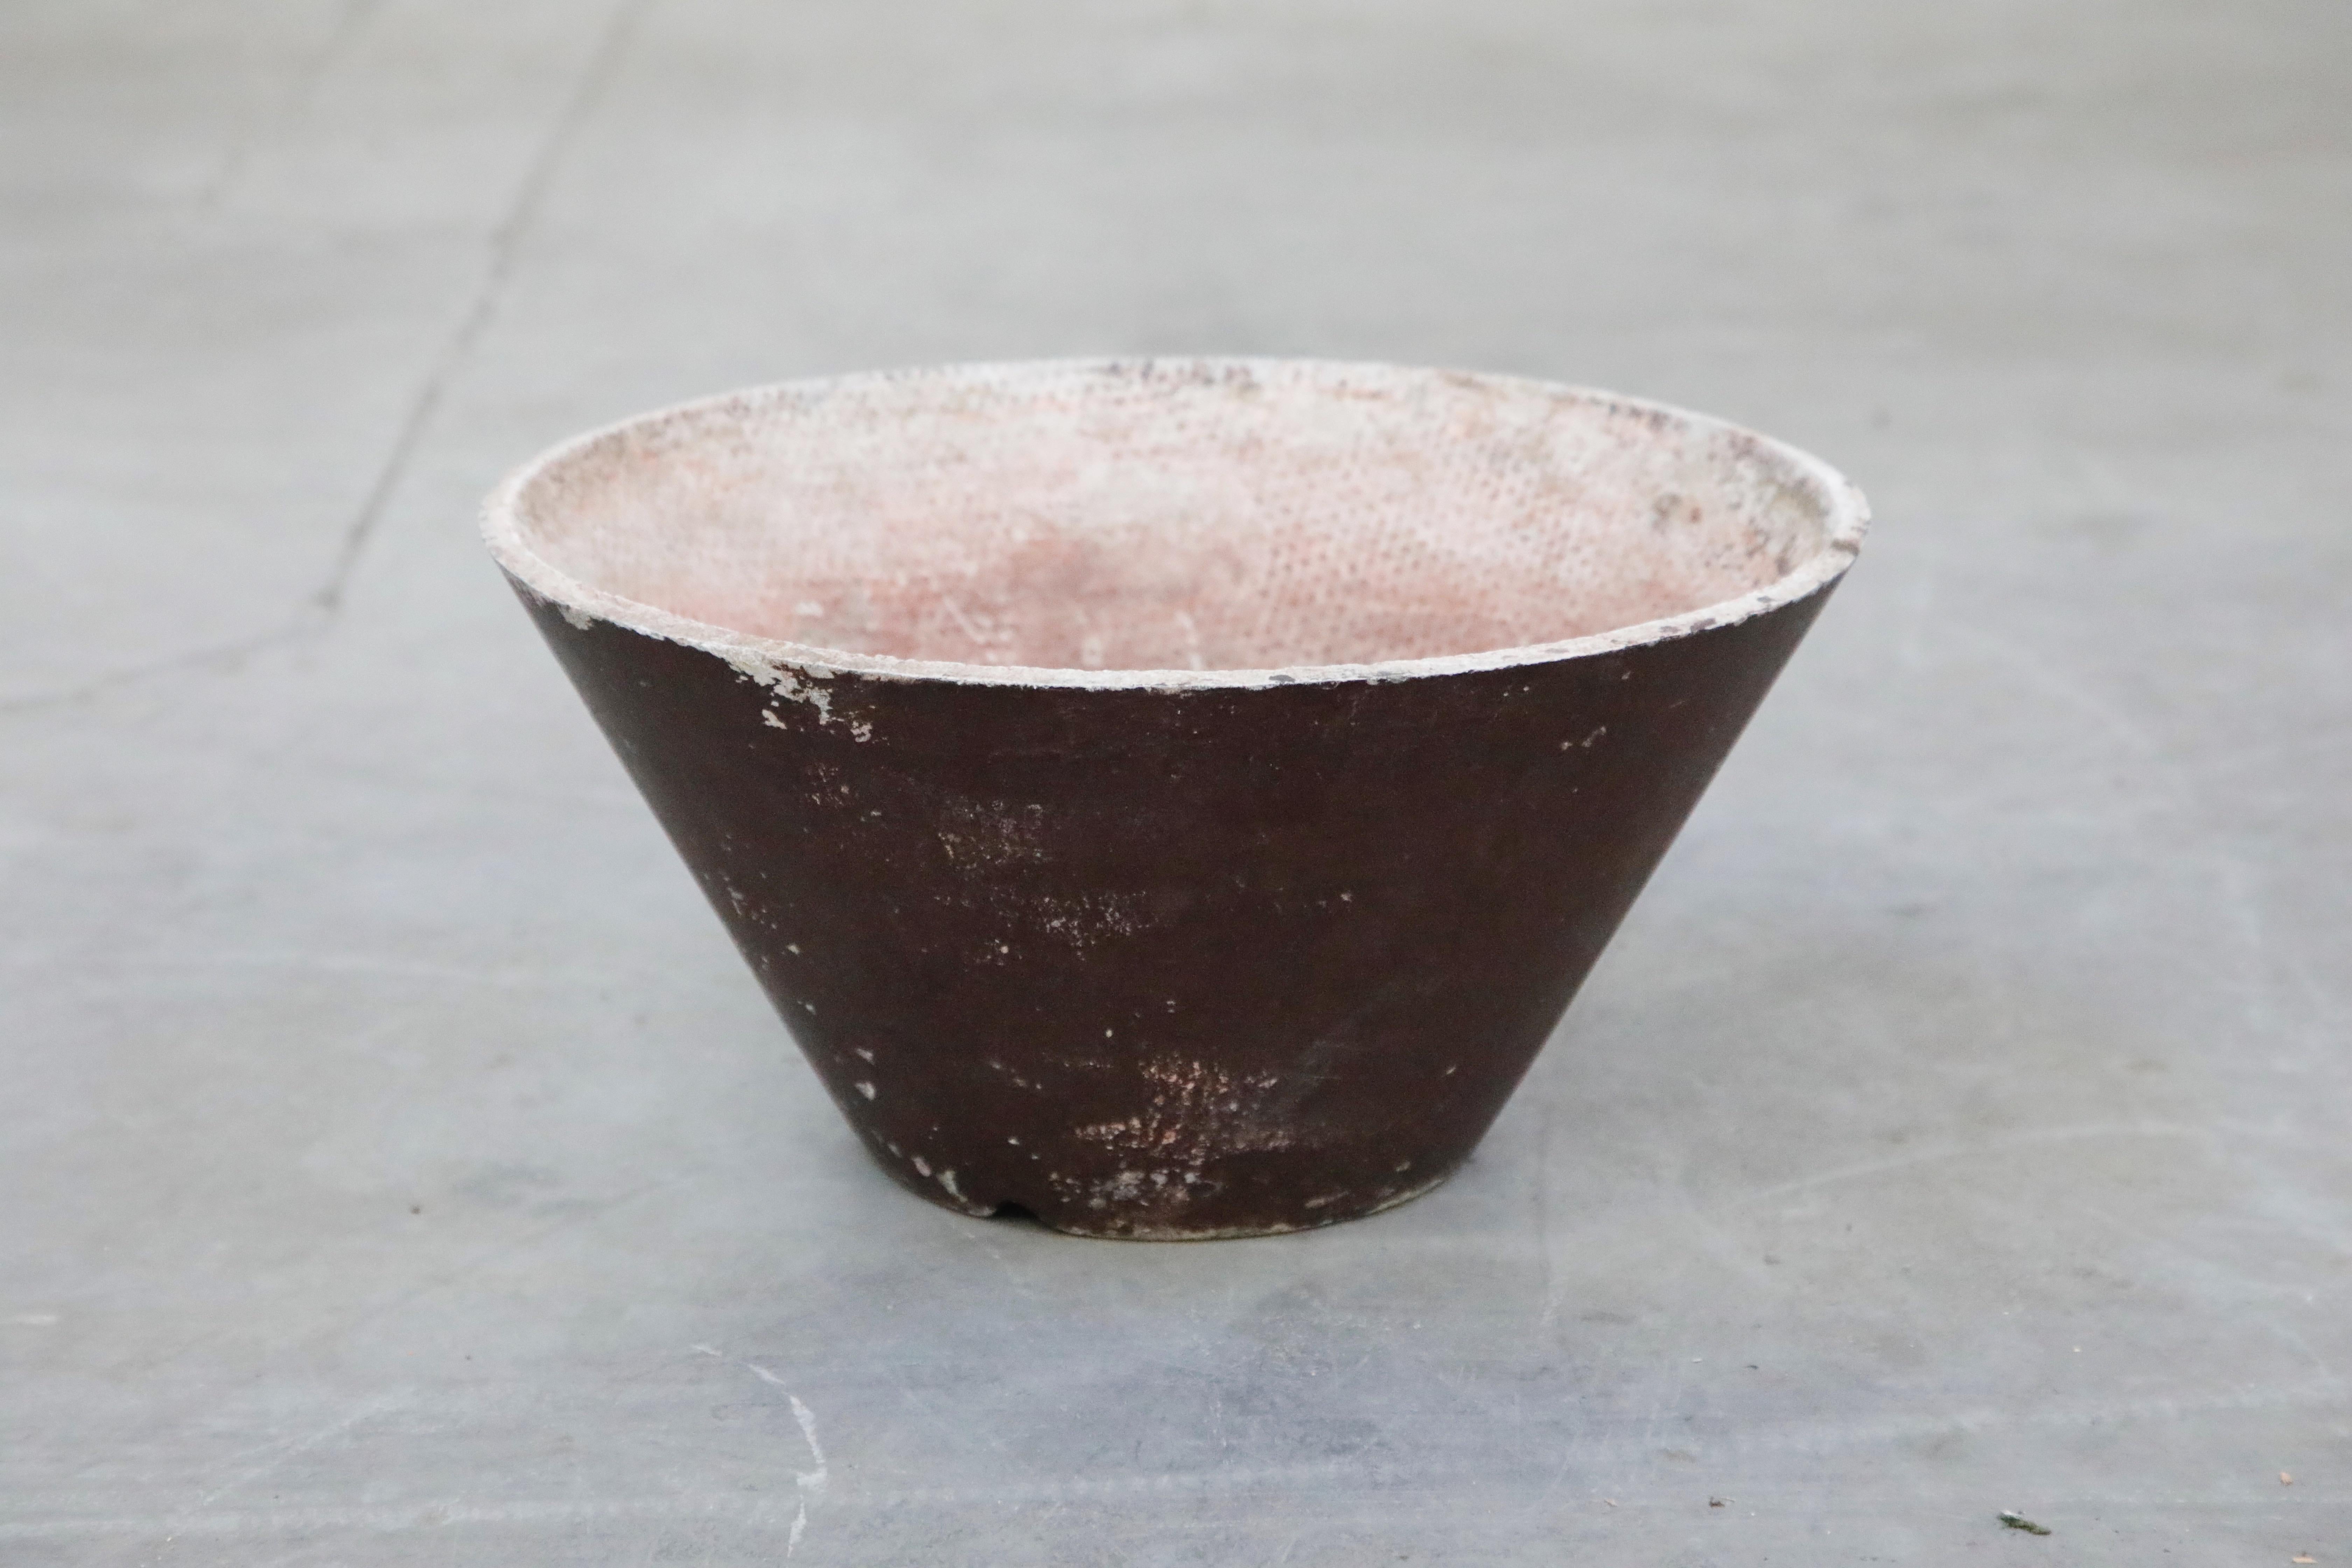 An incredible designer on-trend architectural concrete cone planter by Swiss architect Willy Guhl for Eternit, circa 1968 Switzerland. This cone shaped concrete planter has a patinated burgundy red exterior finish. Consider using this as a